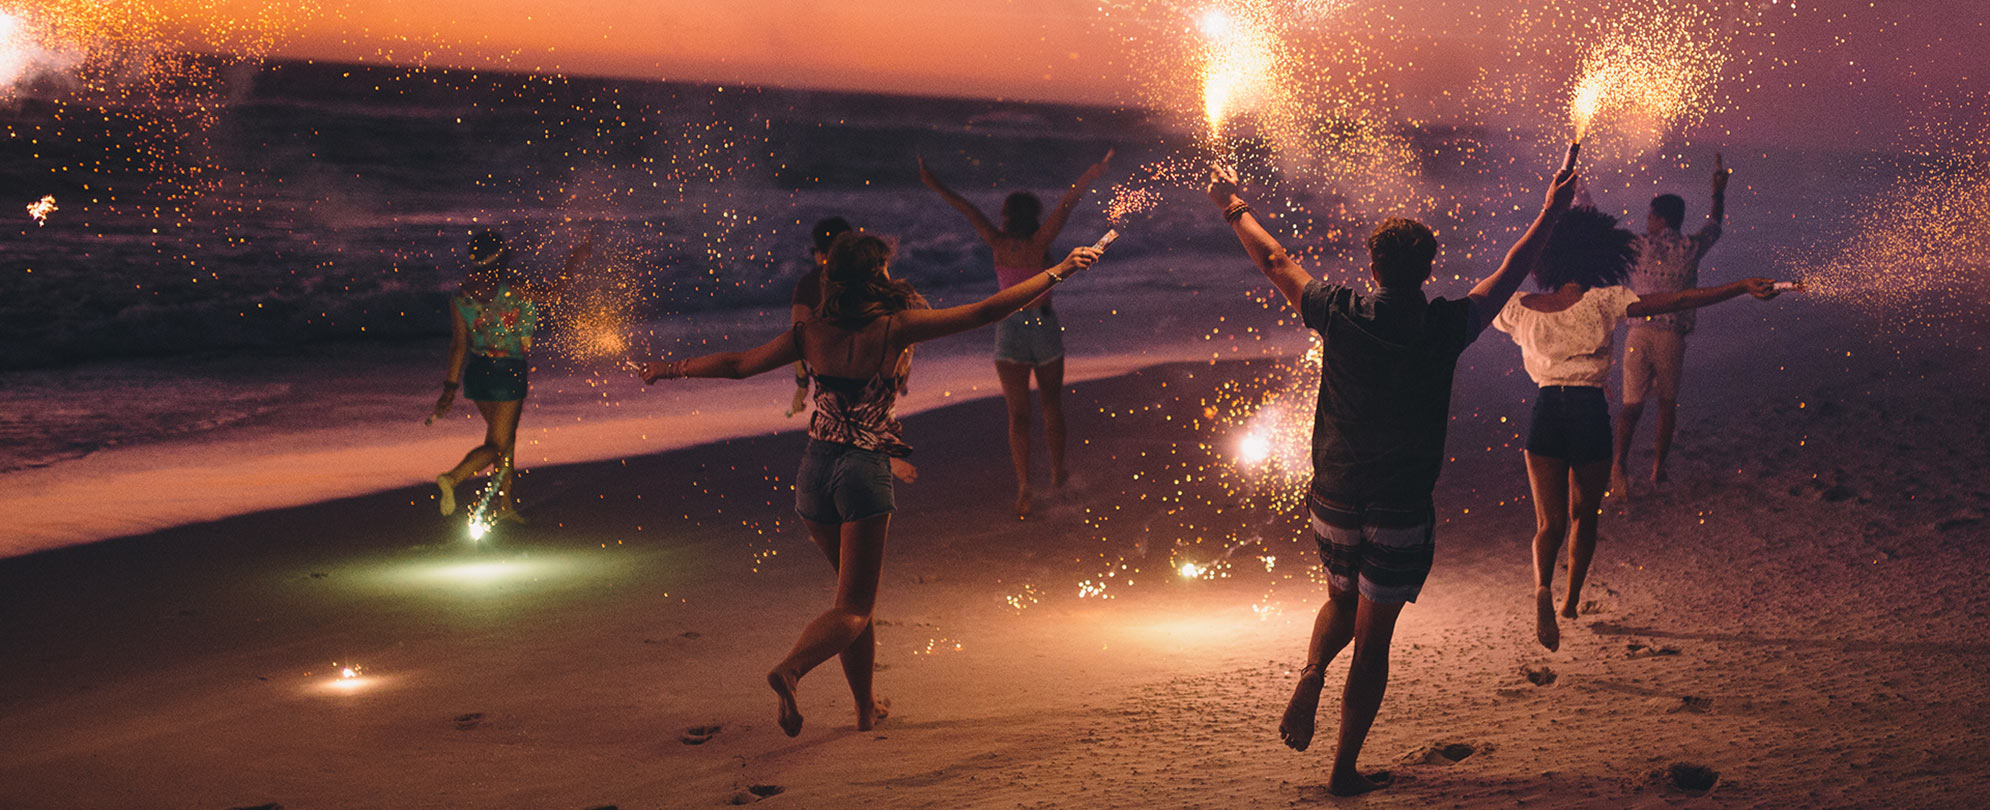 A group of young adults running on the beach with sparklers by the beach.